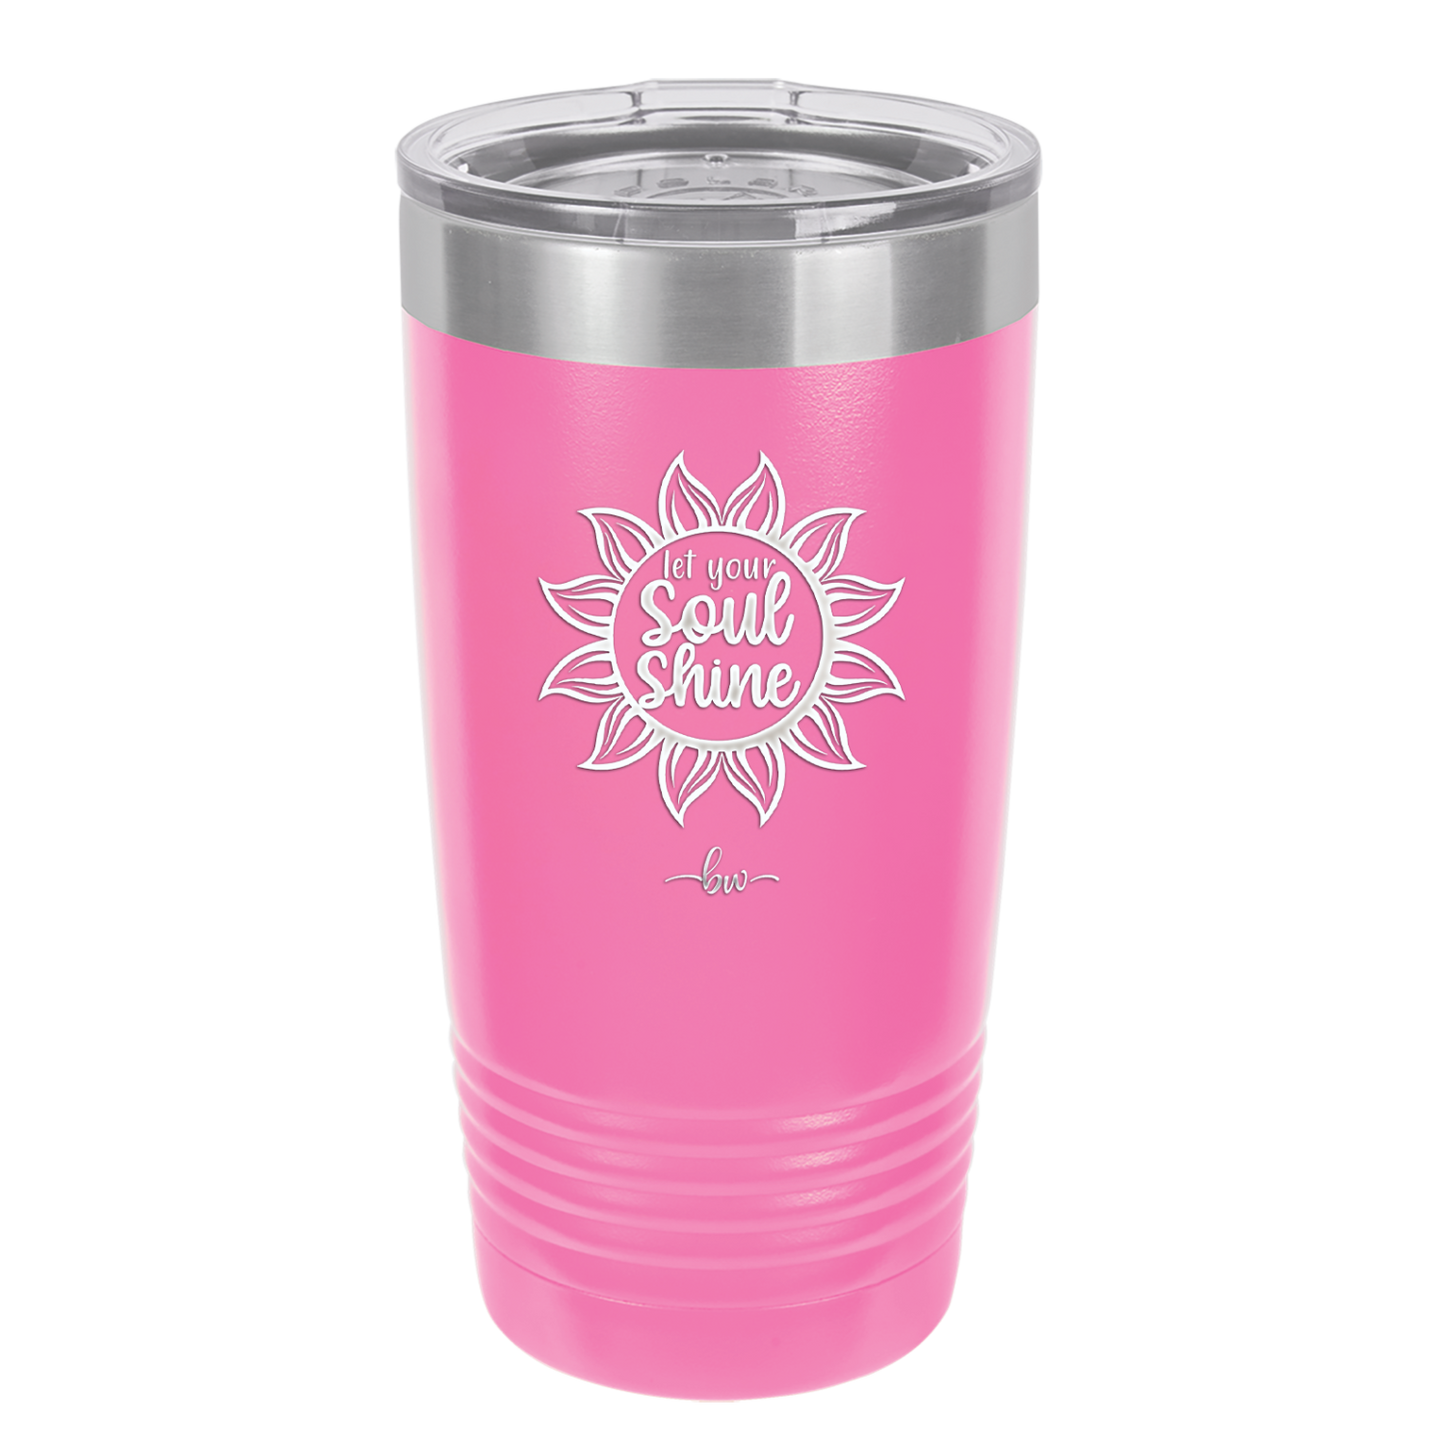 Let Your Soul Shine - Laser Engraved Stainless Steel Drinkware - 2162 -